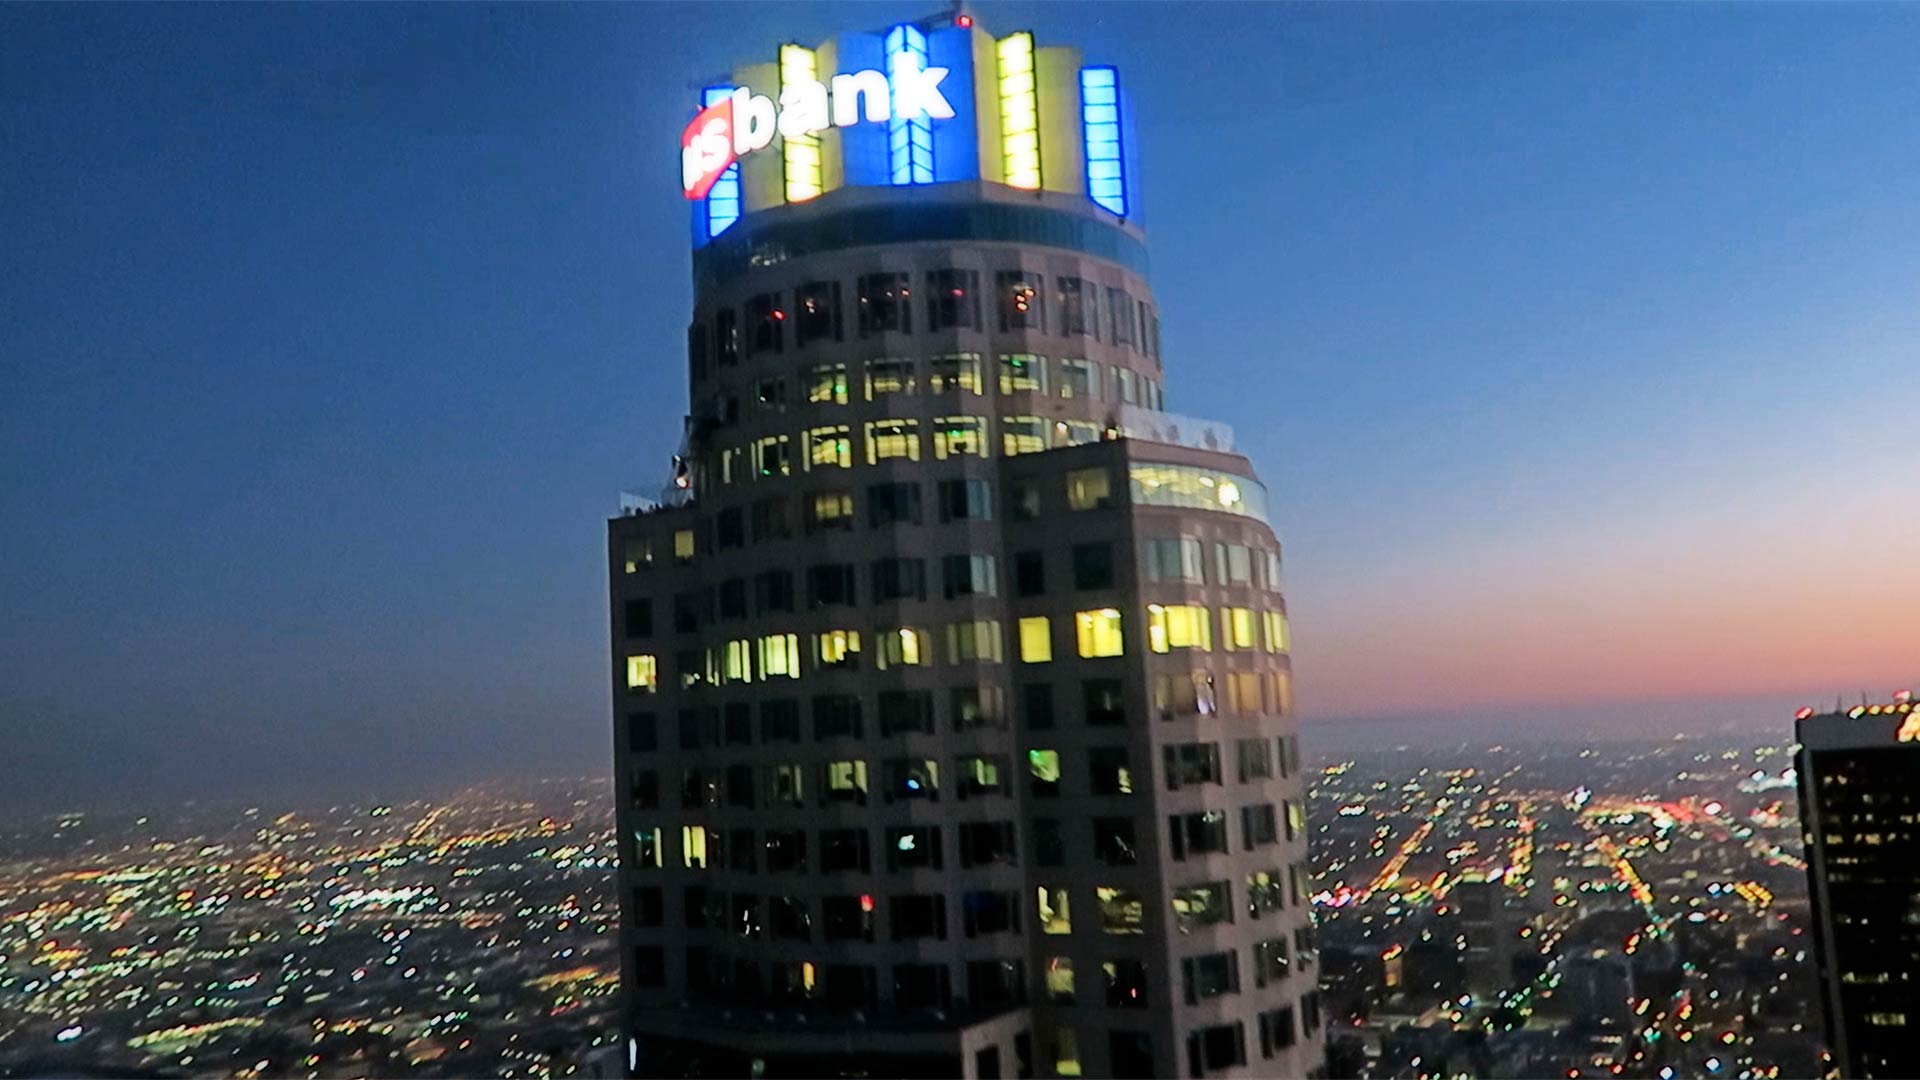 The US Bank building in Los Angeles. Taken at sunset by Celebrity Helicopter Tours.